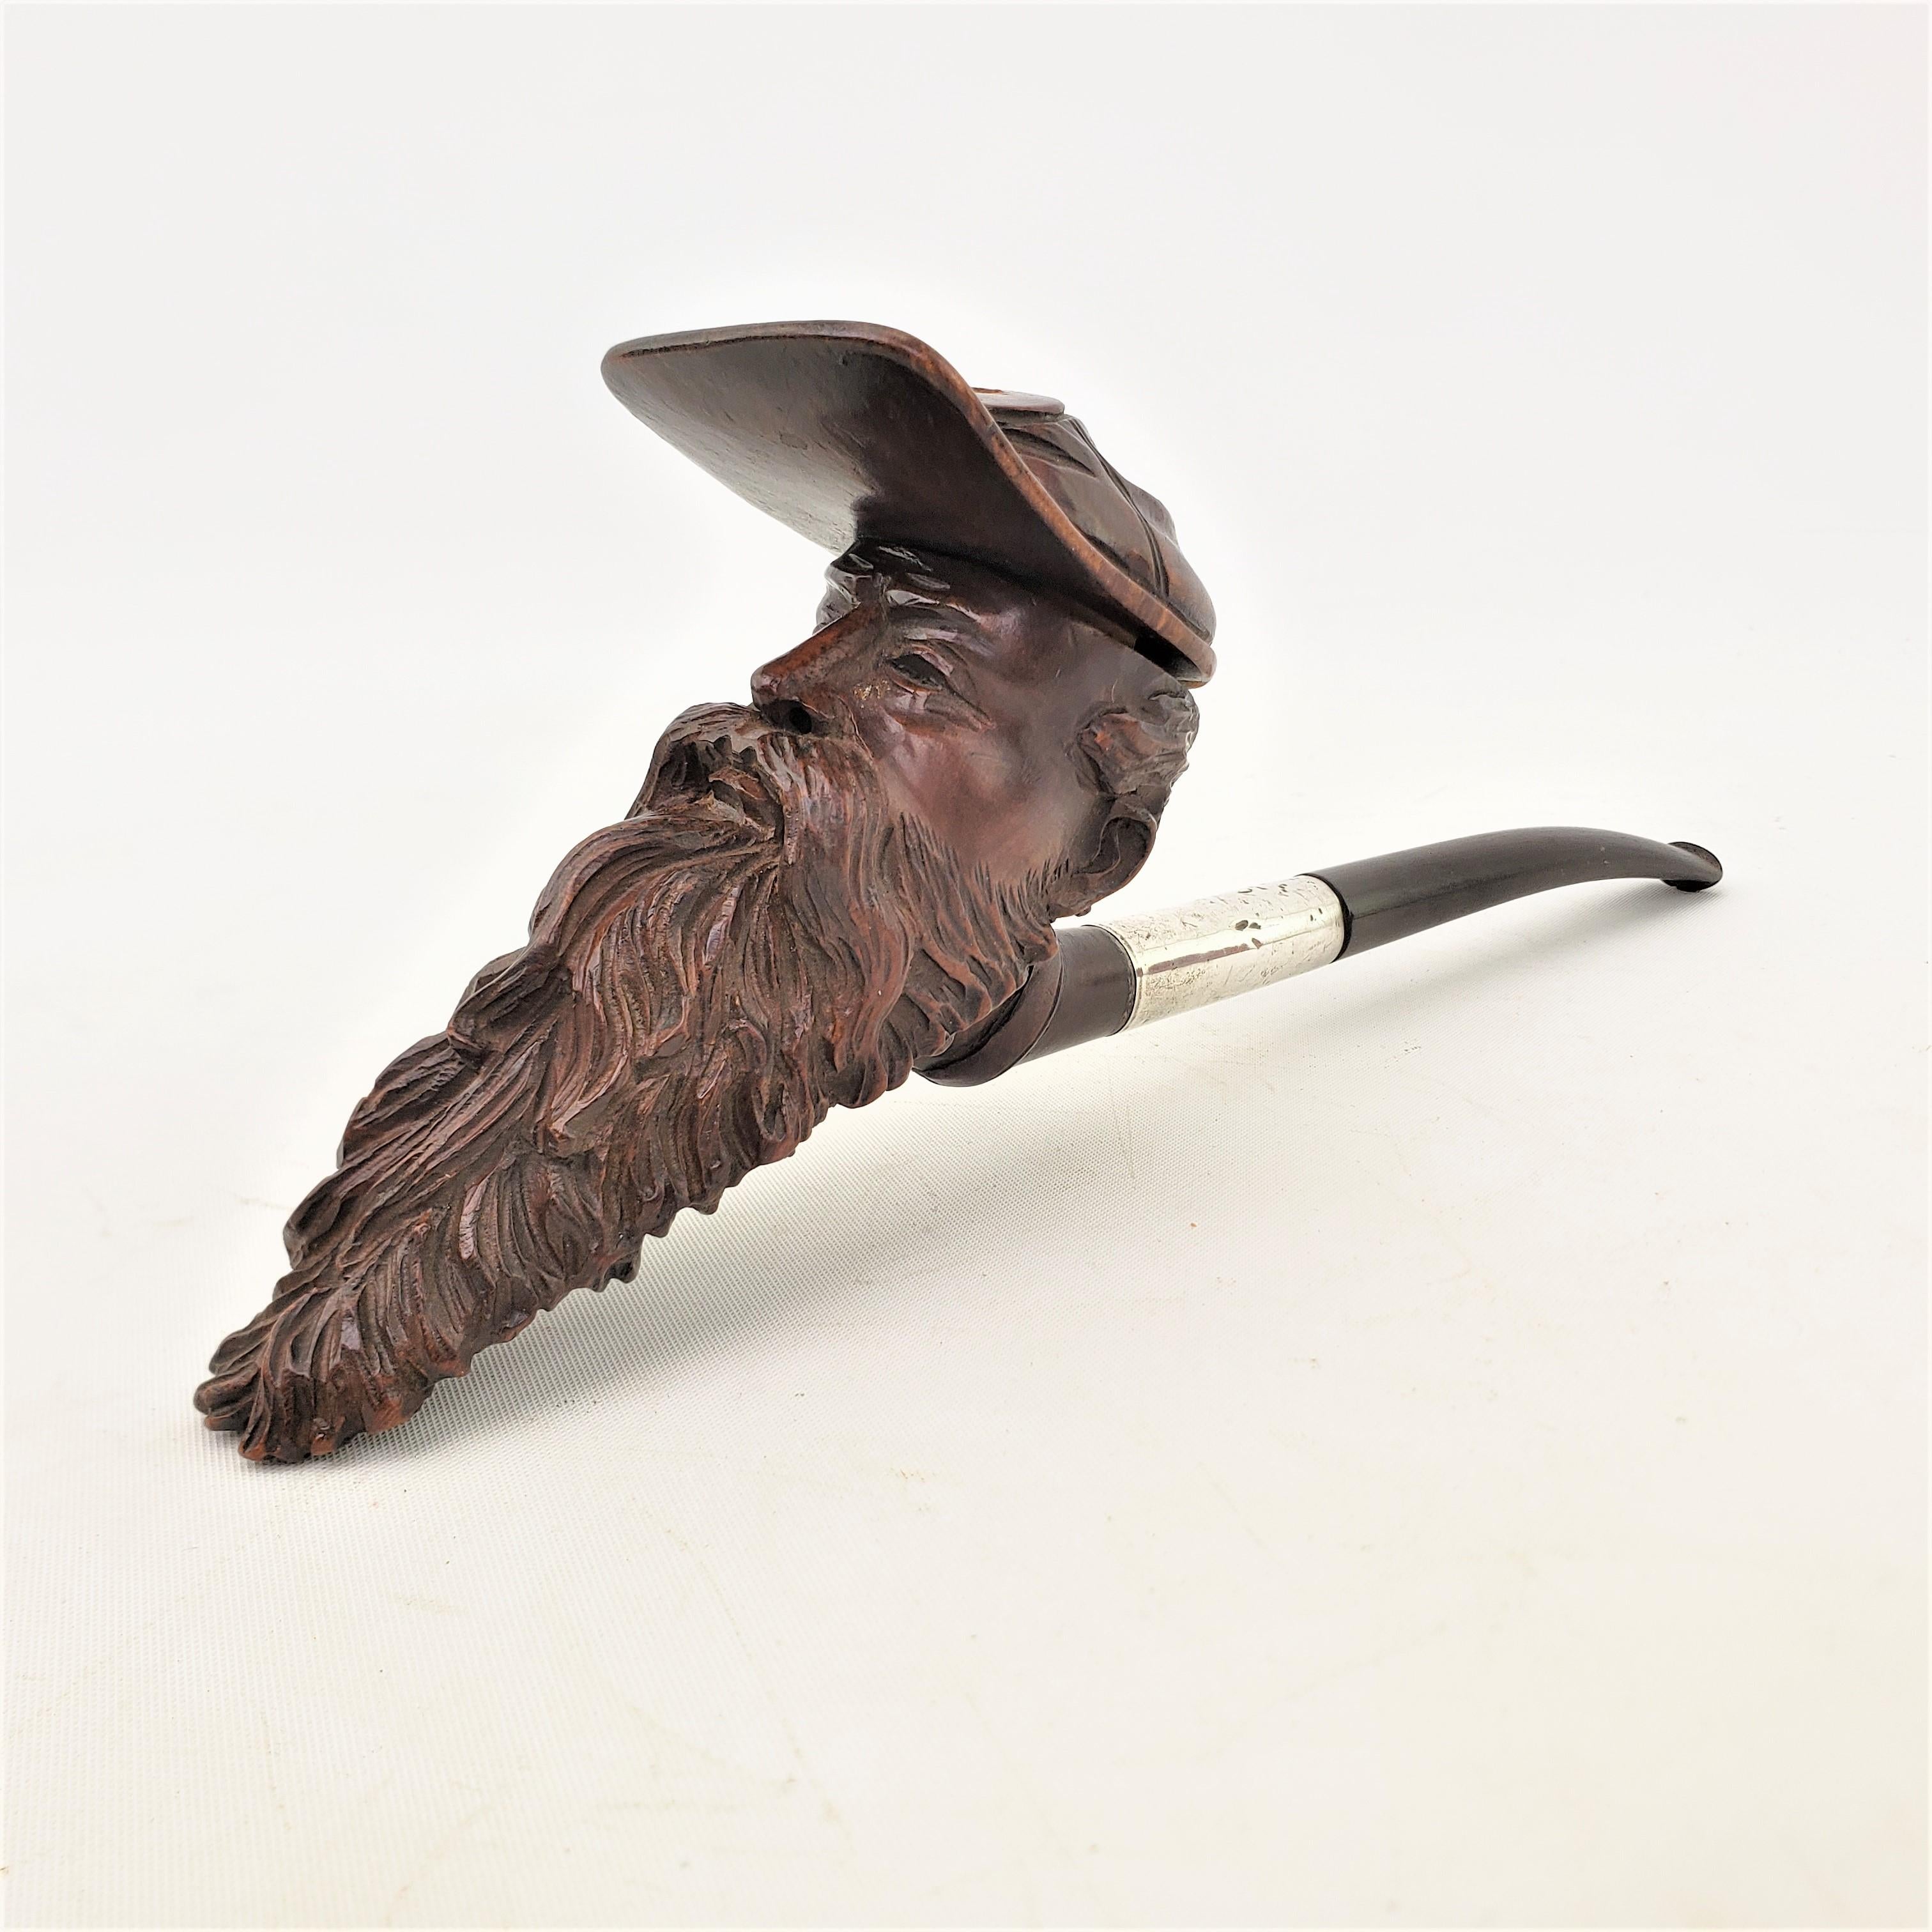 This very well executed hand-carved smoking pipe is unsigned, but presumed to have originated from the United States and date to approximately 1920 and done in an American Craftsman style. The pipe stem is composed of vulcanite with a silver plated